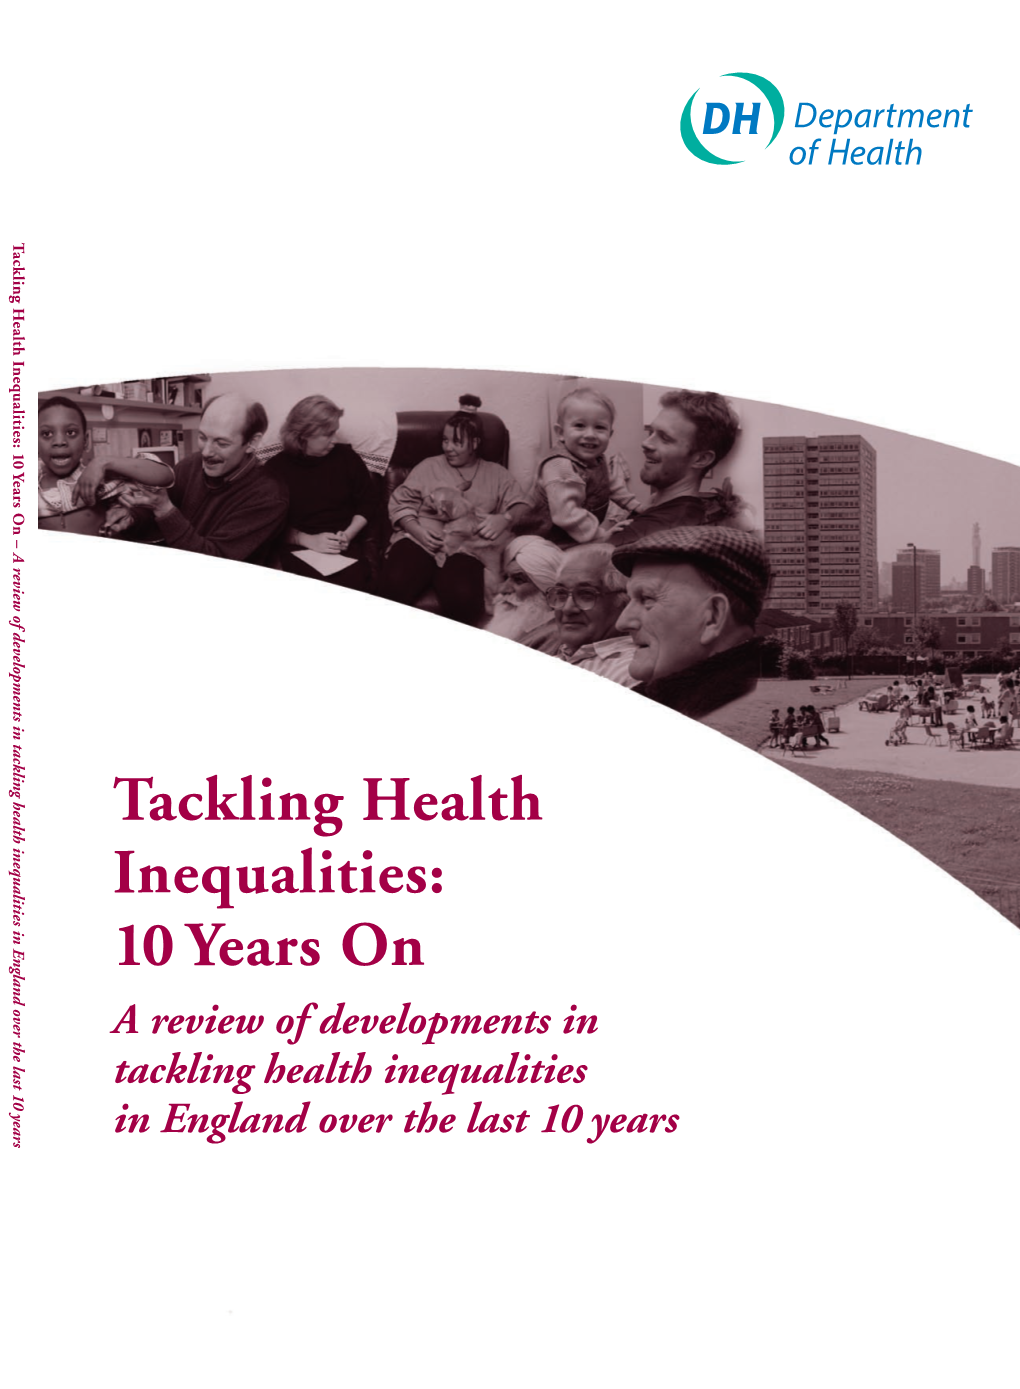 Tackling Health Inequalities: 10 Years on a Review of Developments in Tackling Health Inequalities in England Over the Last 10 Years DH INFORMATION READER BOX